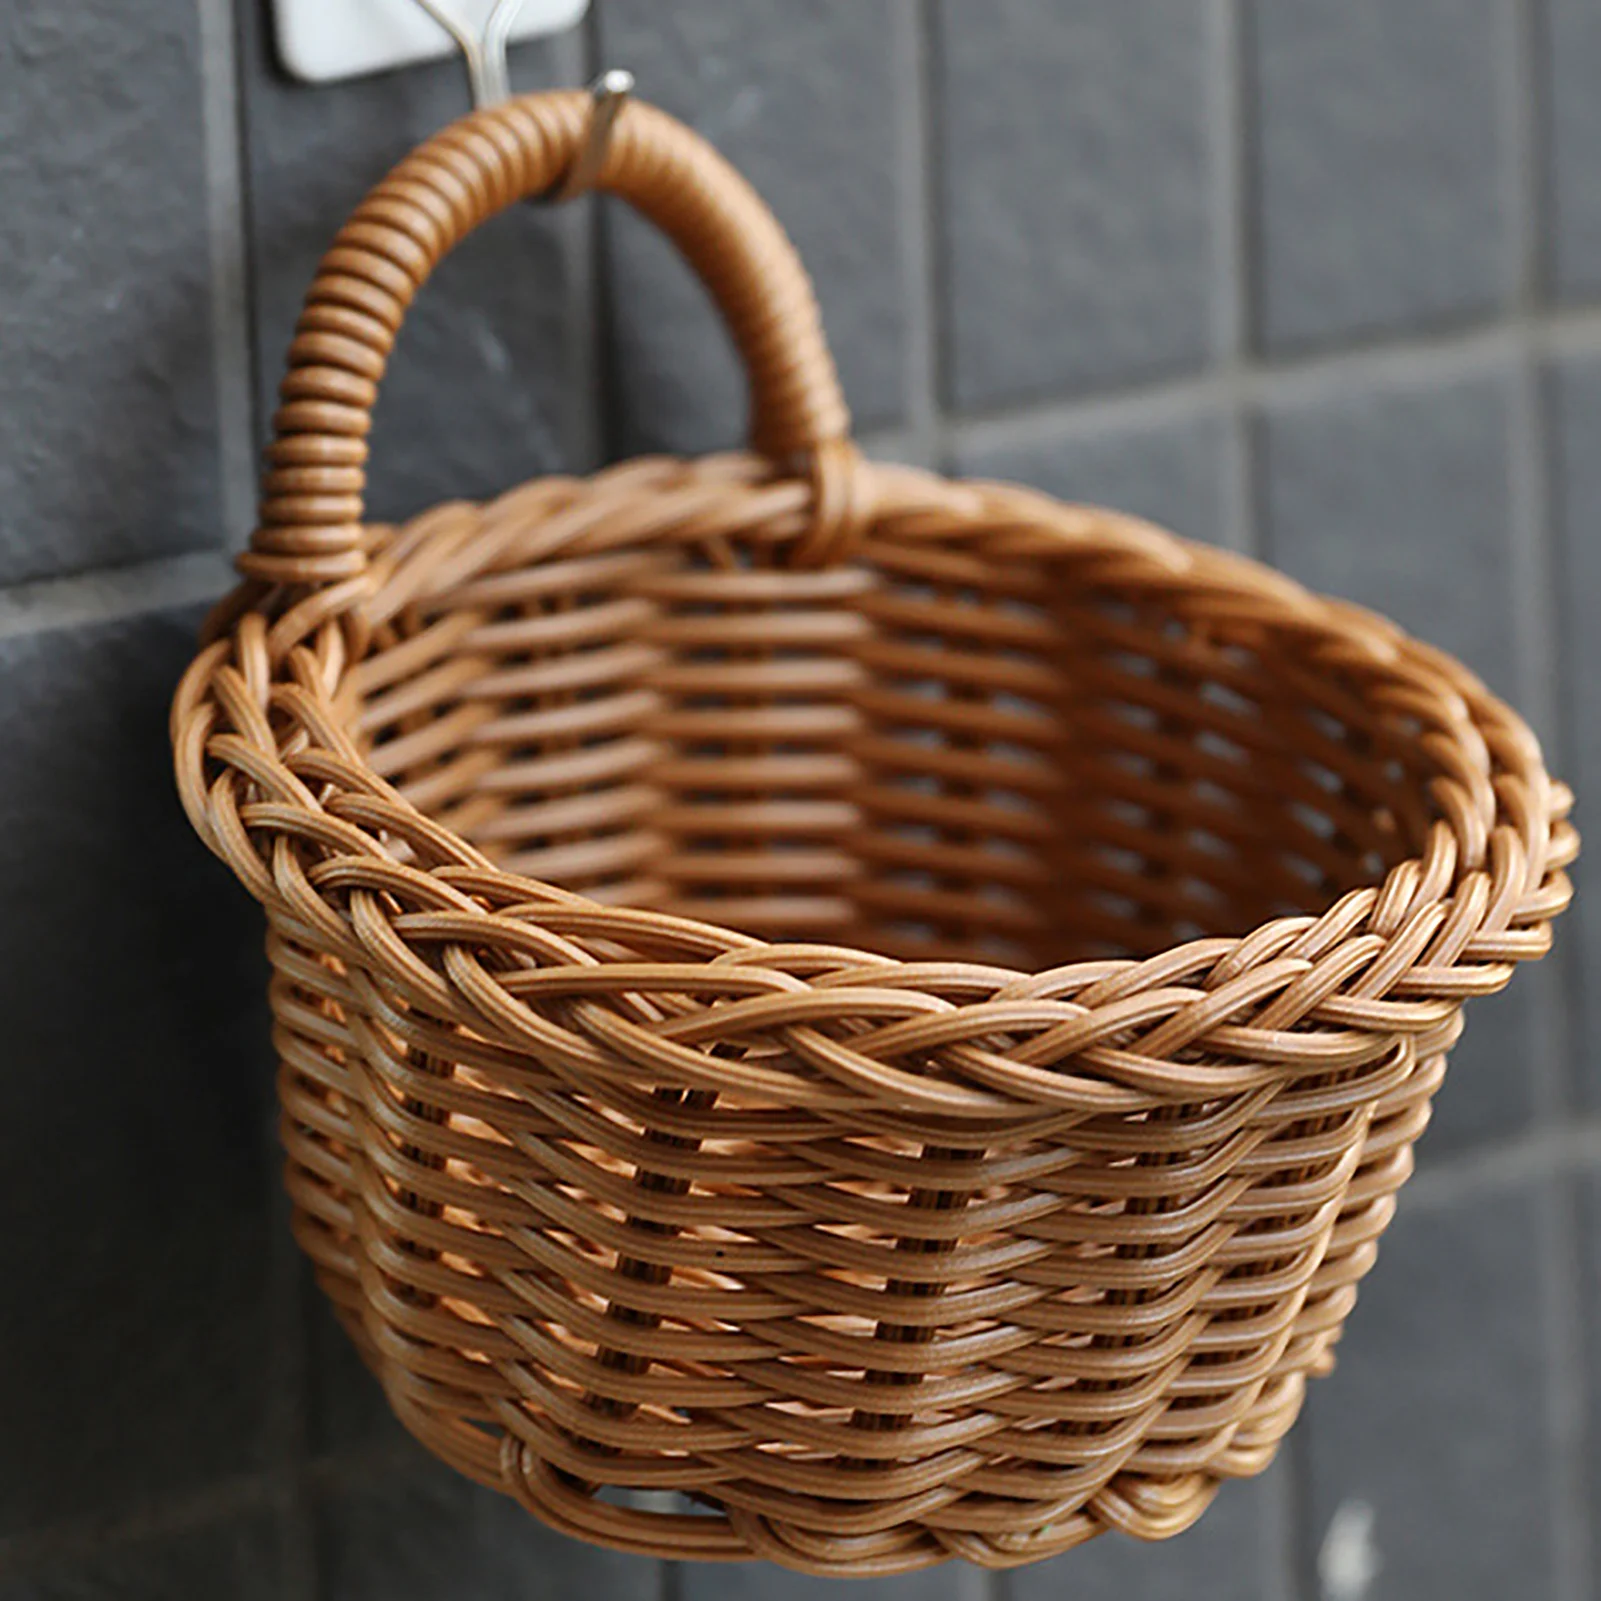 Hangings Storage Basket Woven Hangings Organizer Basket With Handle Handmade Woven Basket For Storage Plants Kitchen Office